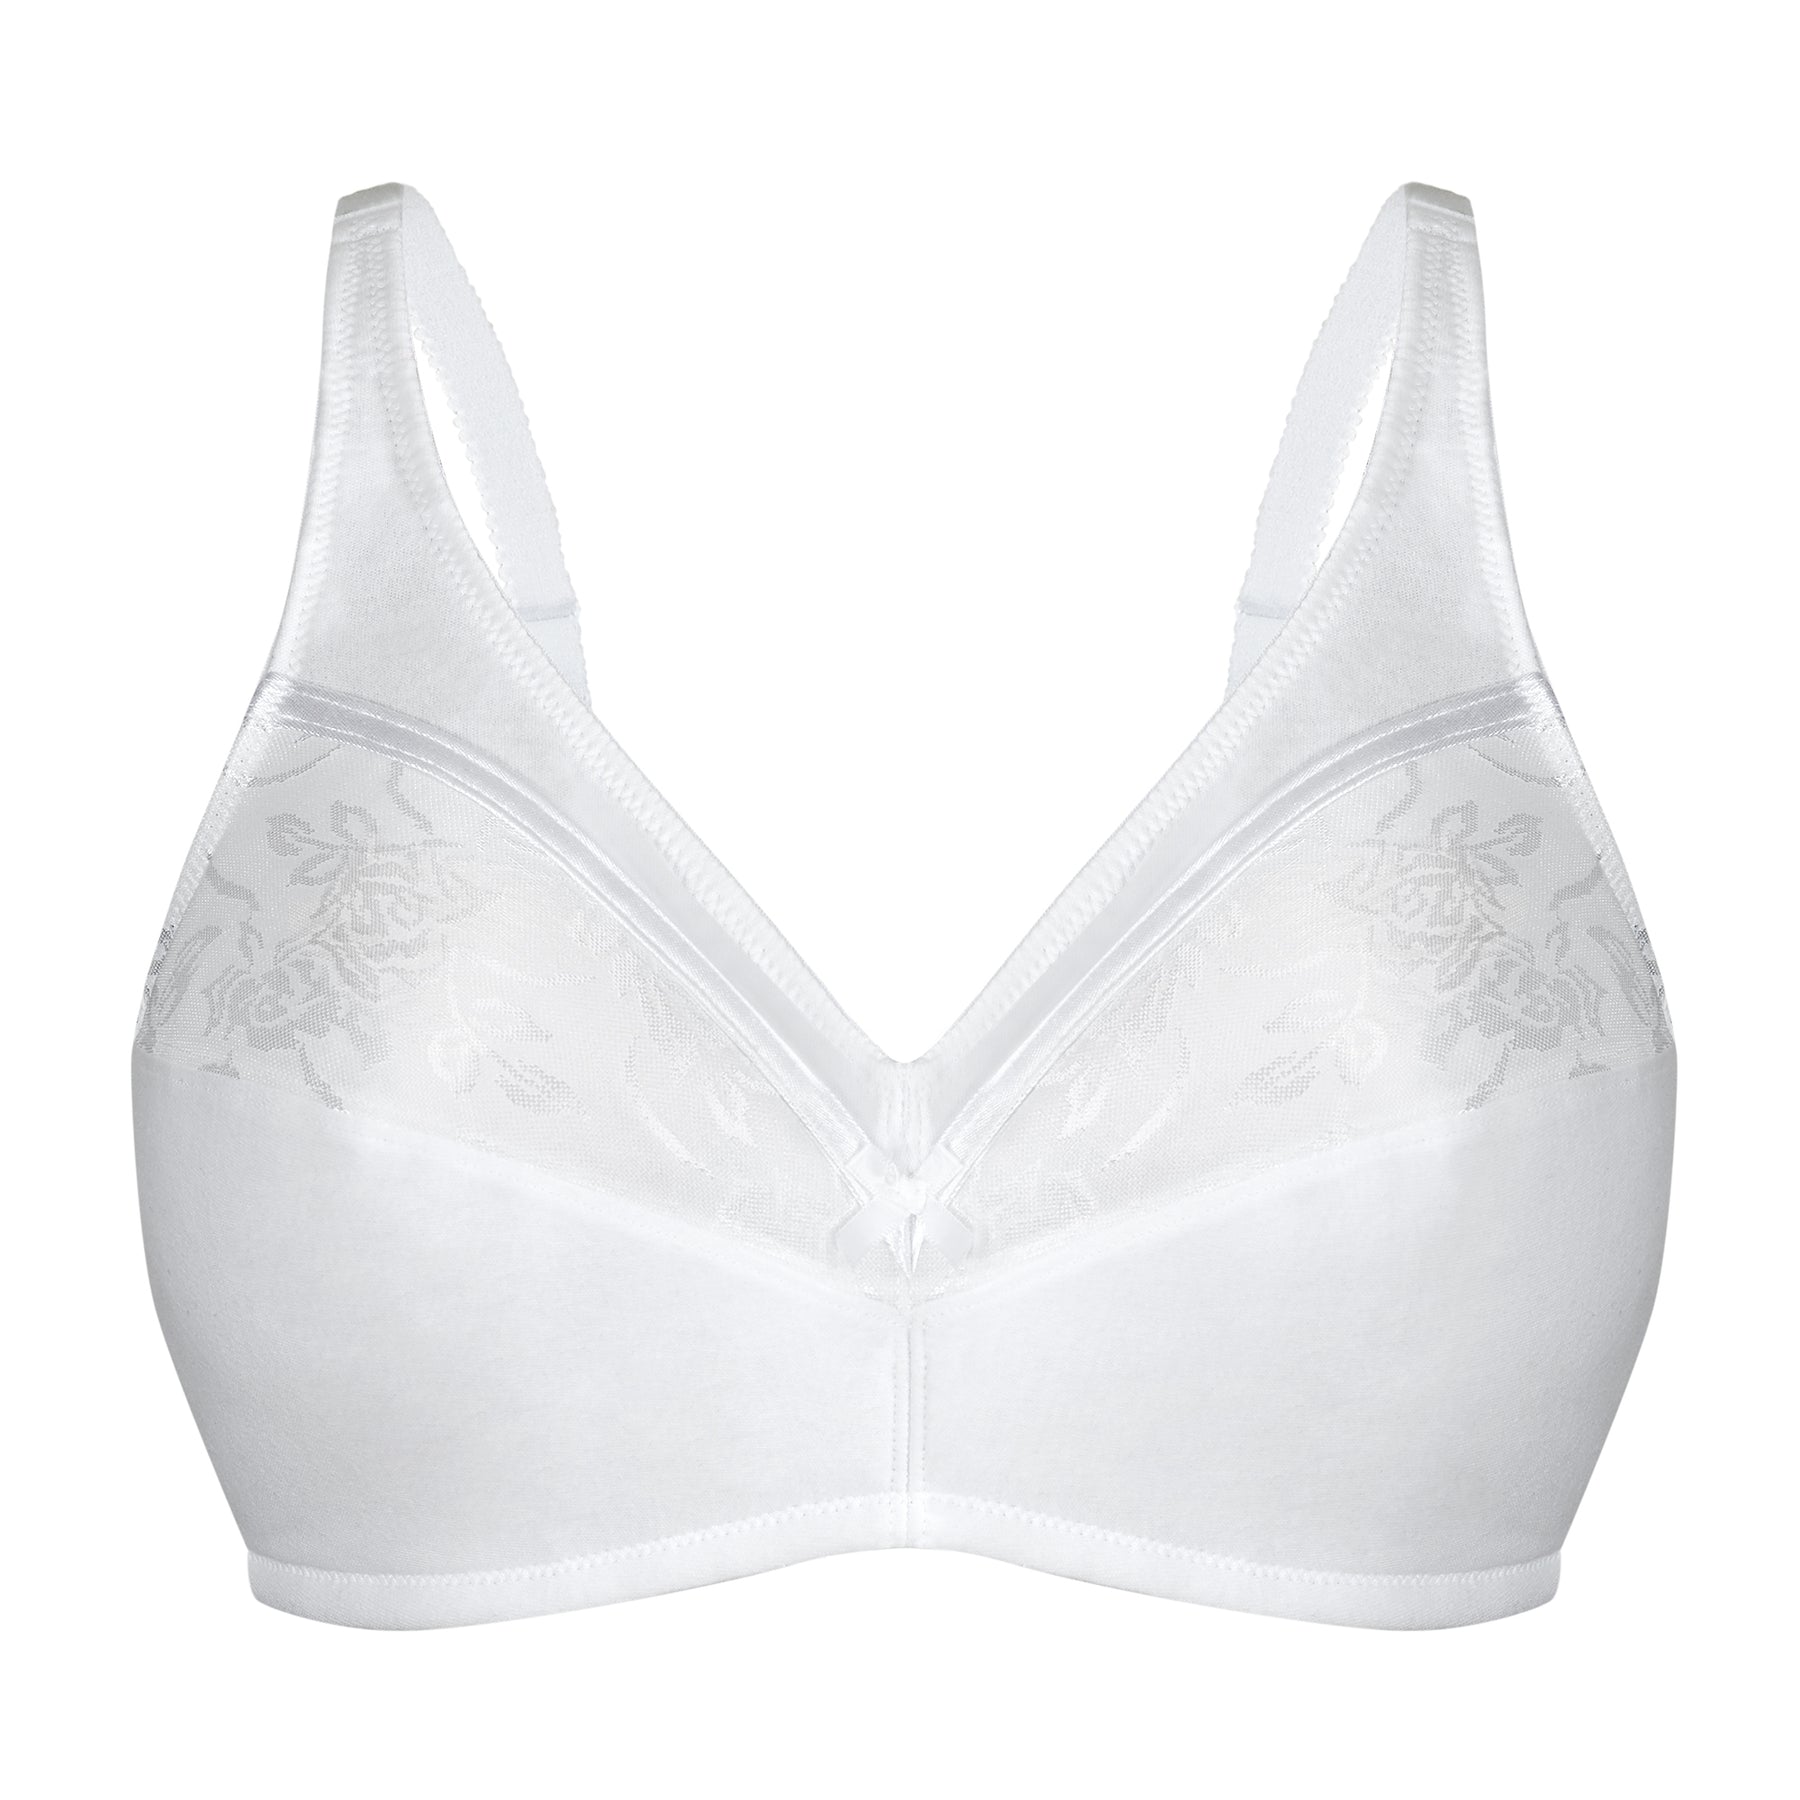 Bestform 535-43 Women's Soft Cups Nude Non-Wired Full Cup Bra 34DD :  Bestform: : Clothing, Shoes & Accessories